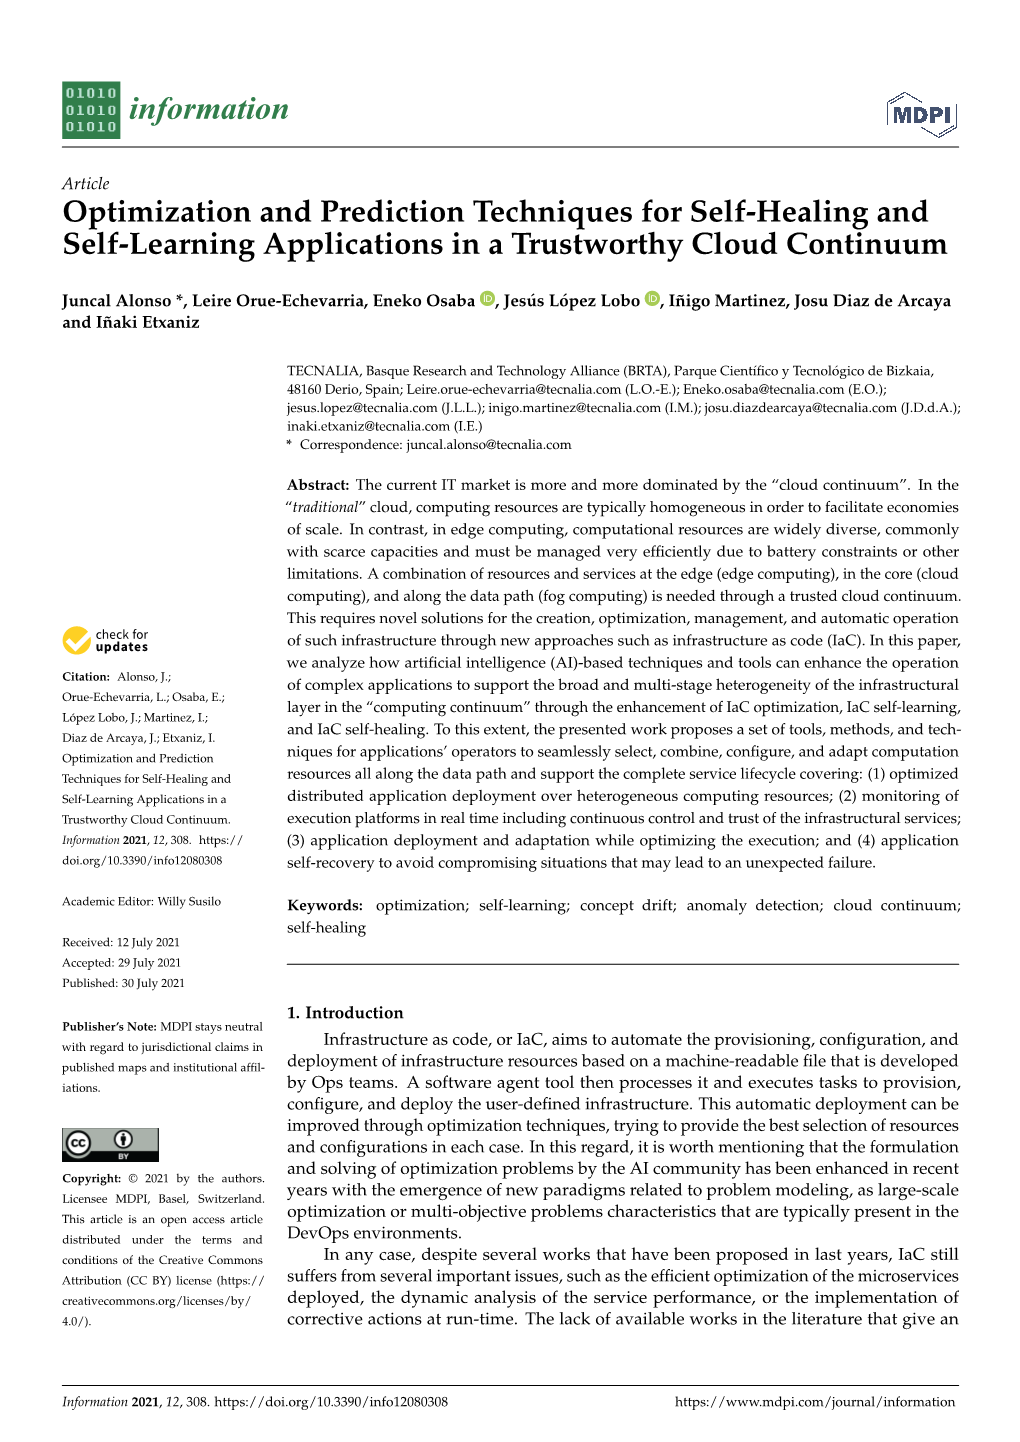 Optimization and Prediction Techniques for Self-Healing and Self-Learning Applications in a Trustworthy Cloud Continuum